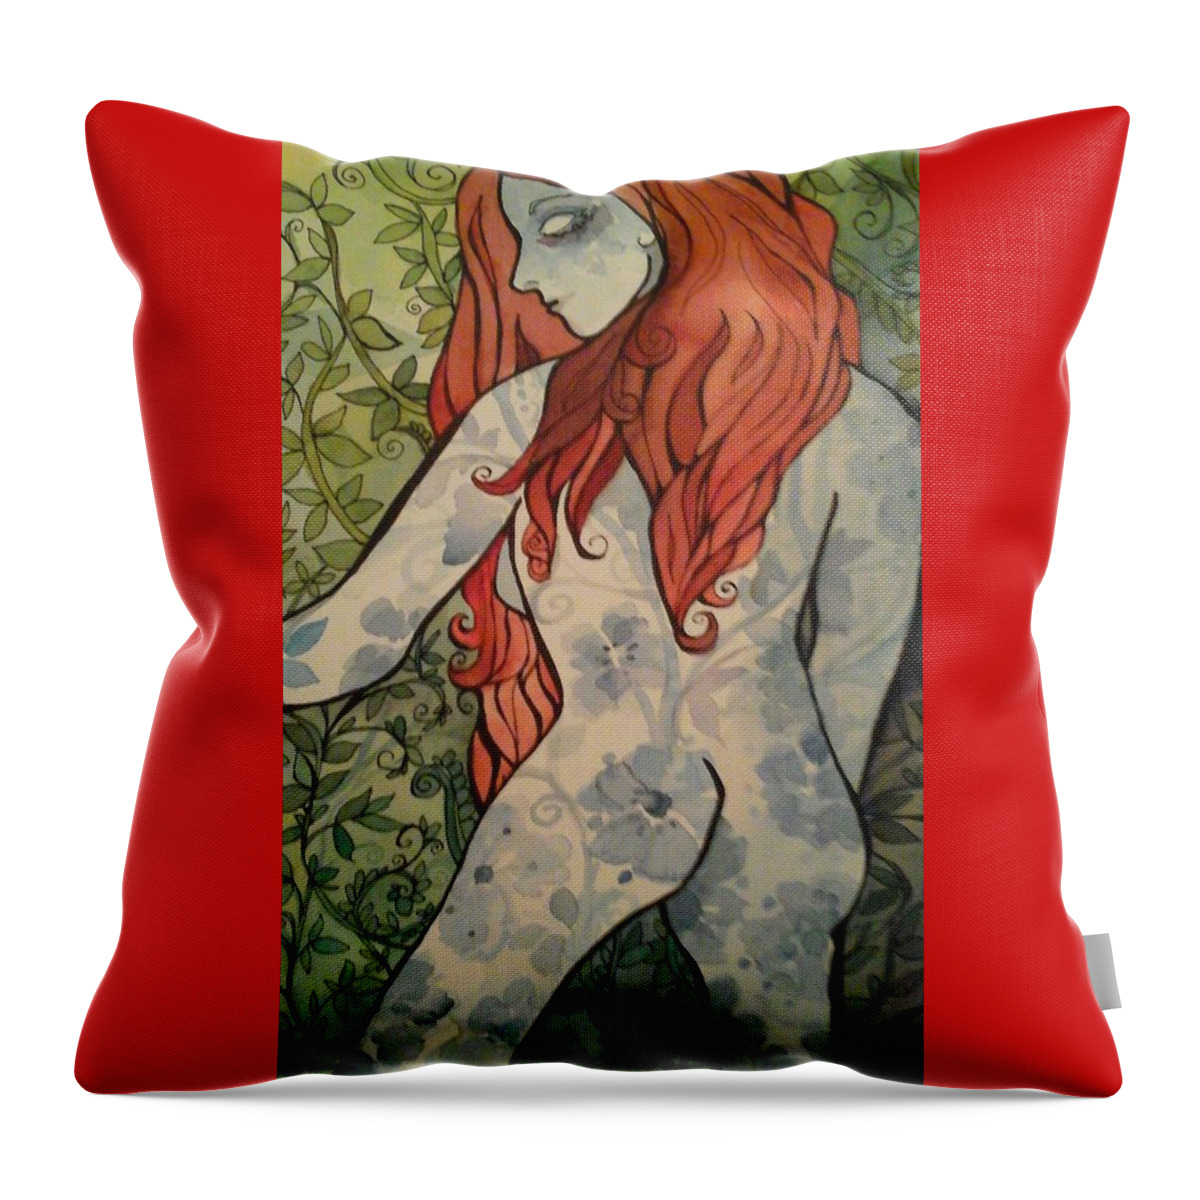 Women Throw Pillow featuring the painting NO by Claudia Cole Meek